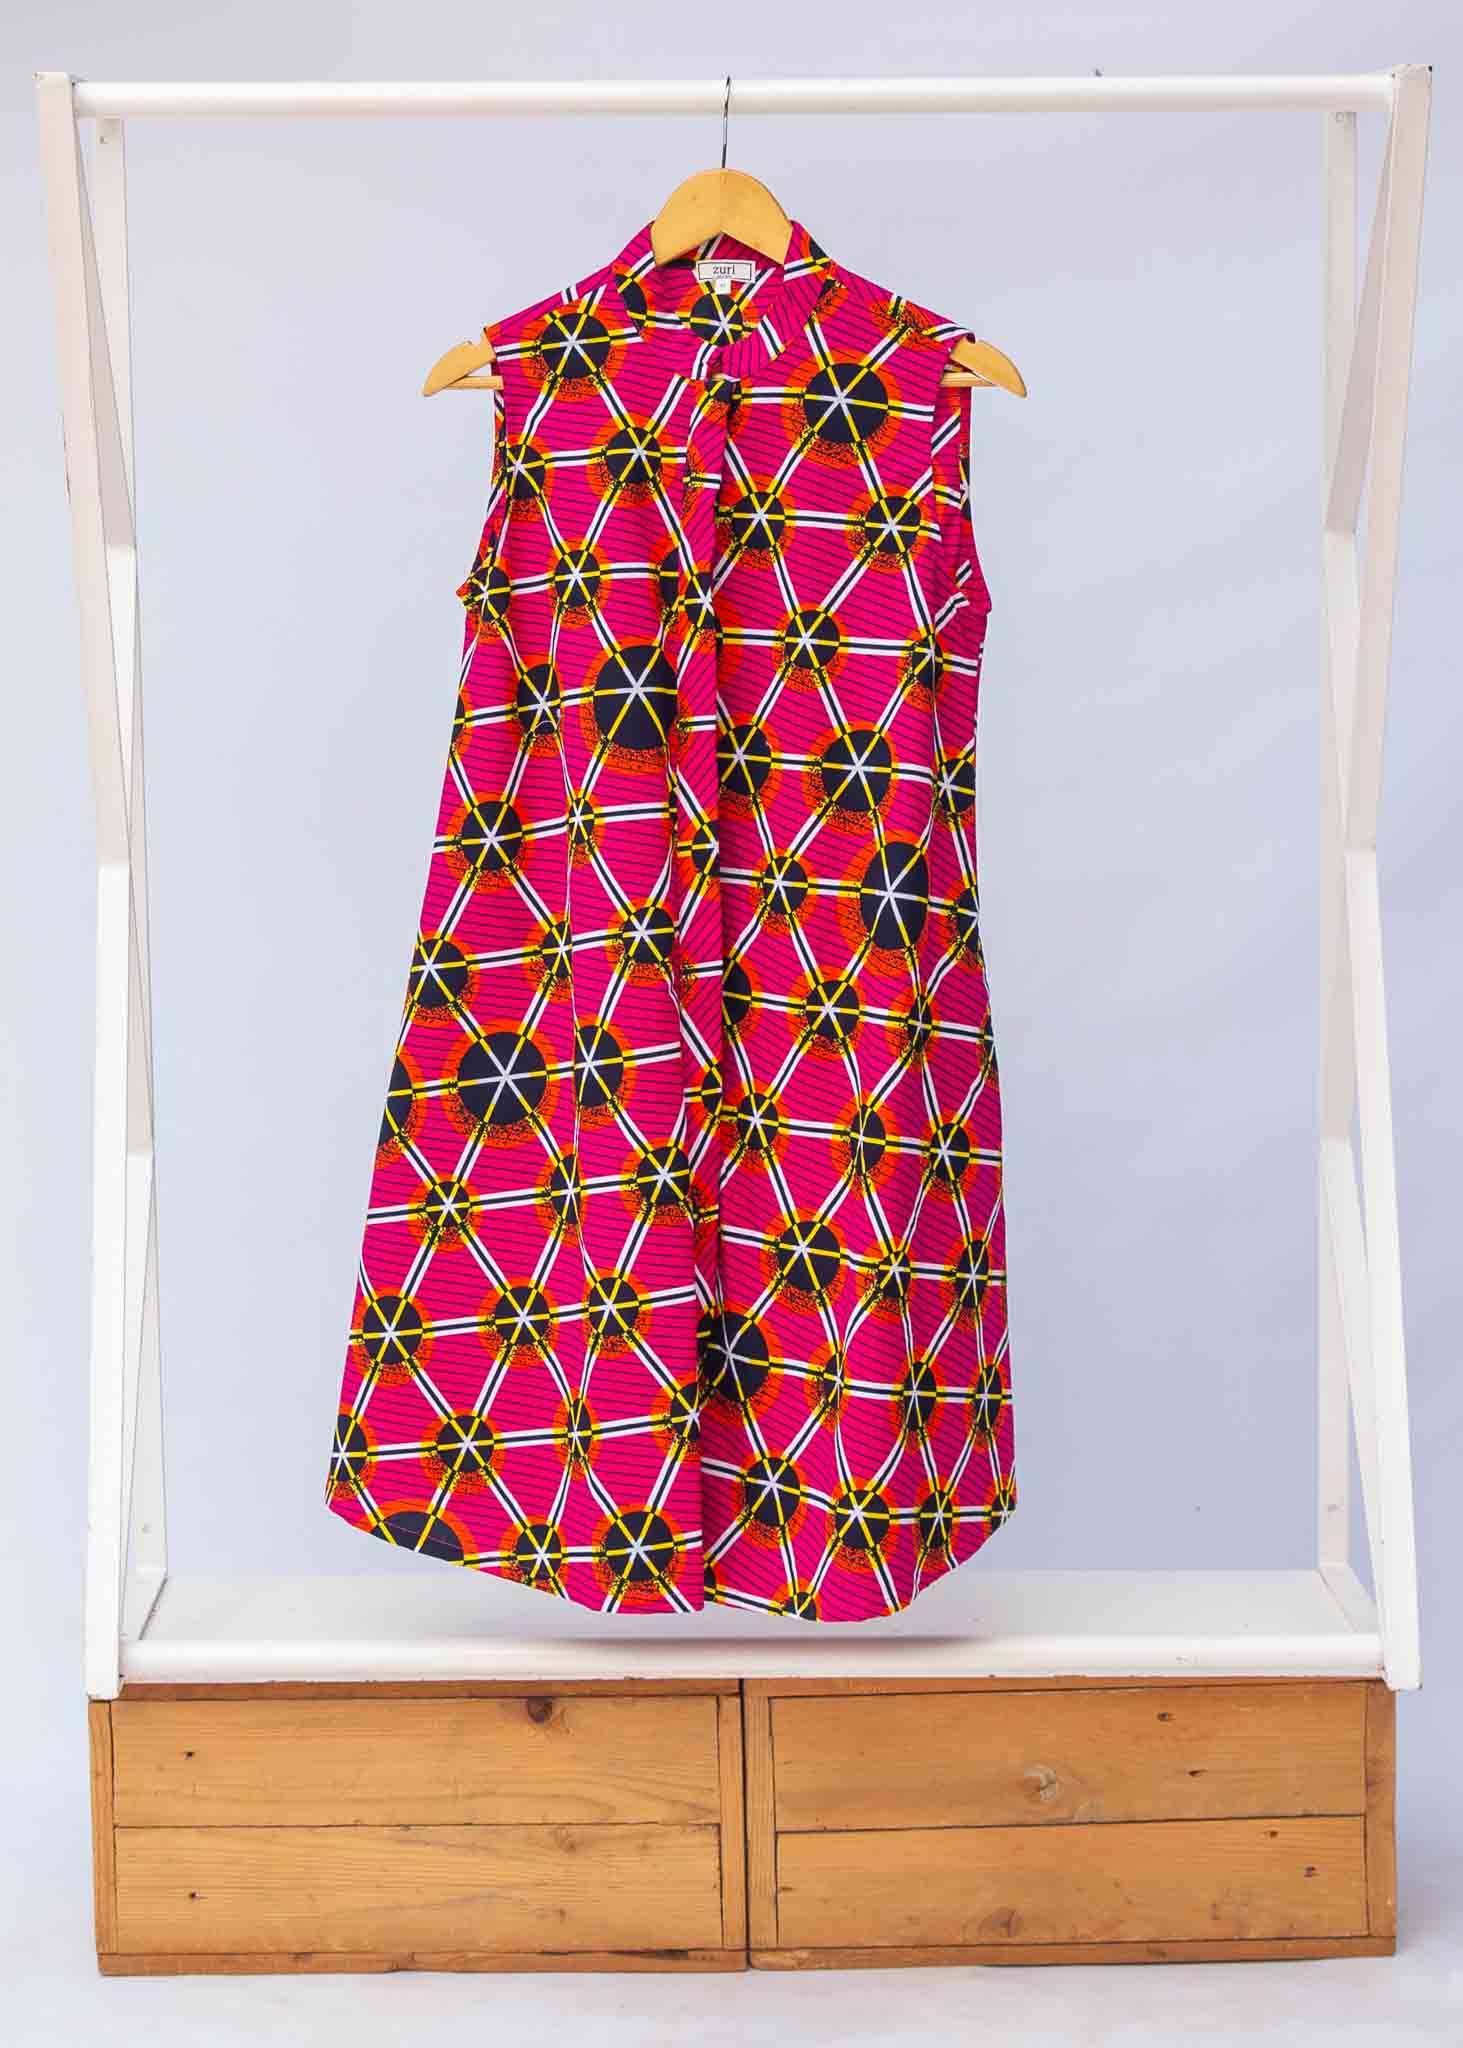 Display of fuchsia dress with black dots and white and yellow lines.